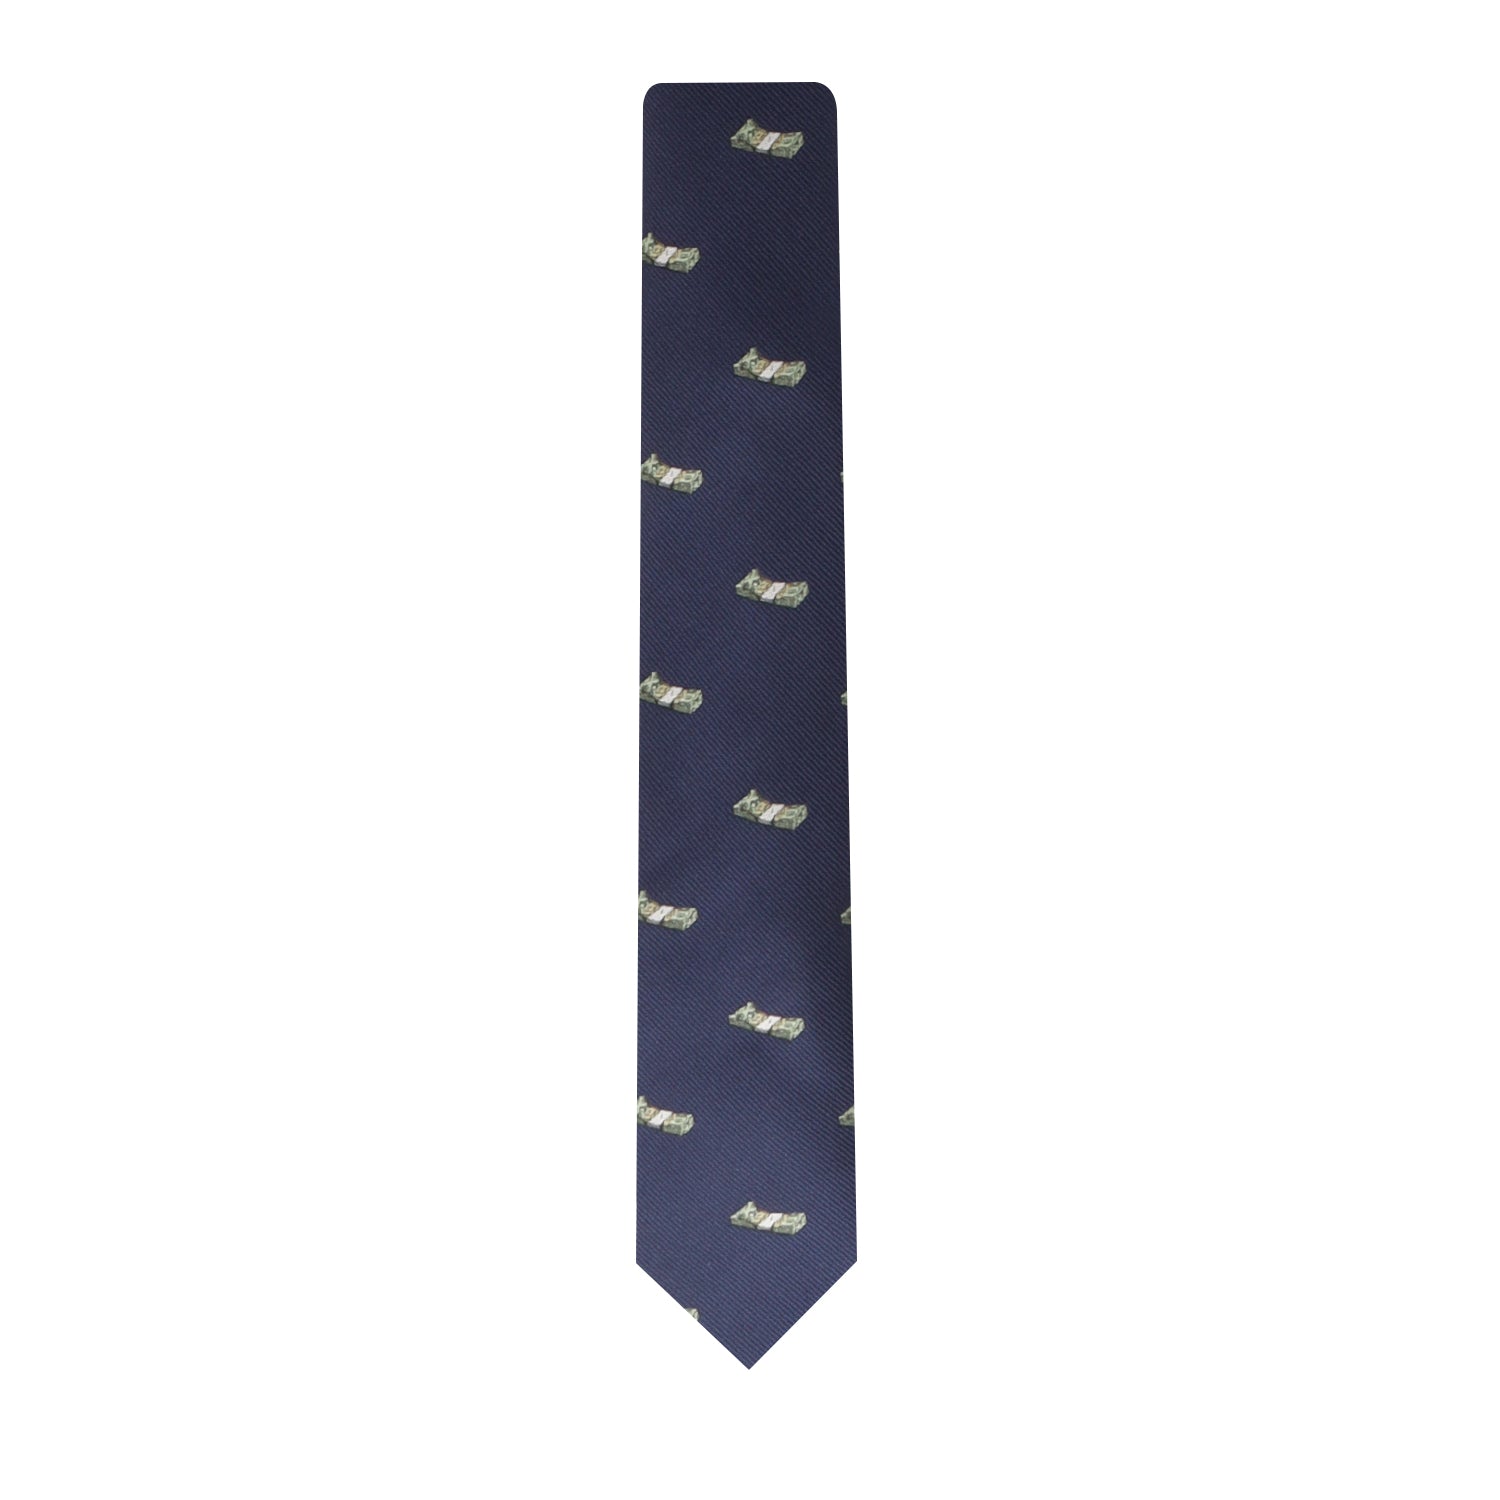 A Cash Skinny Tie with a green bird on it.